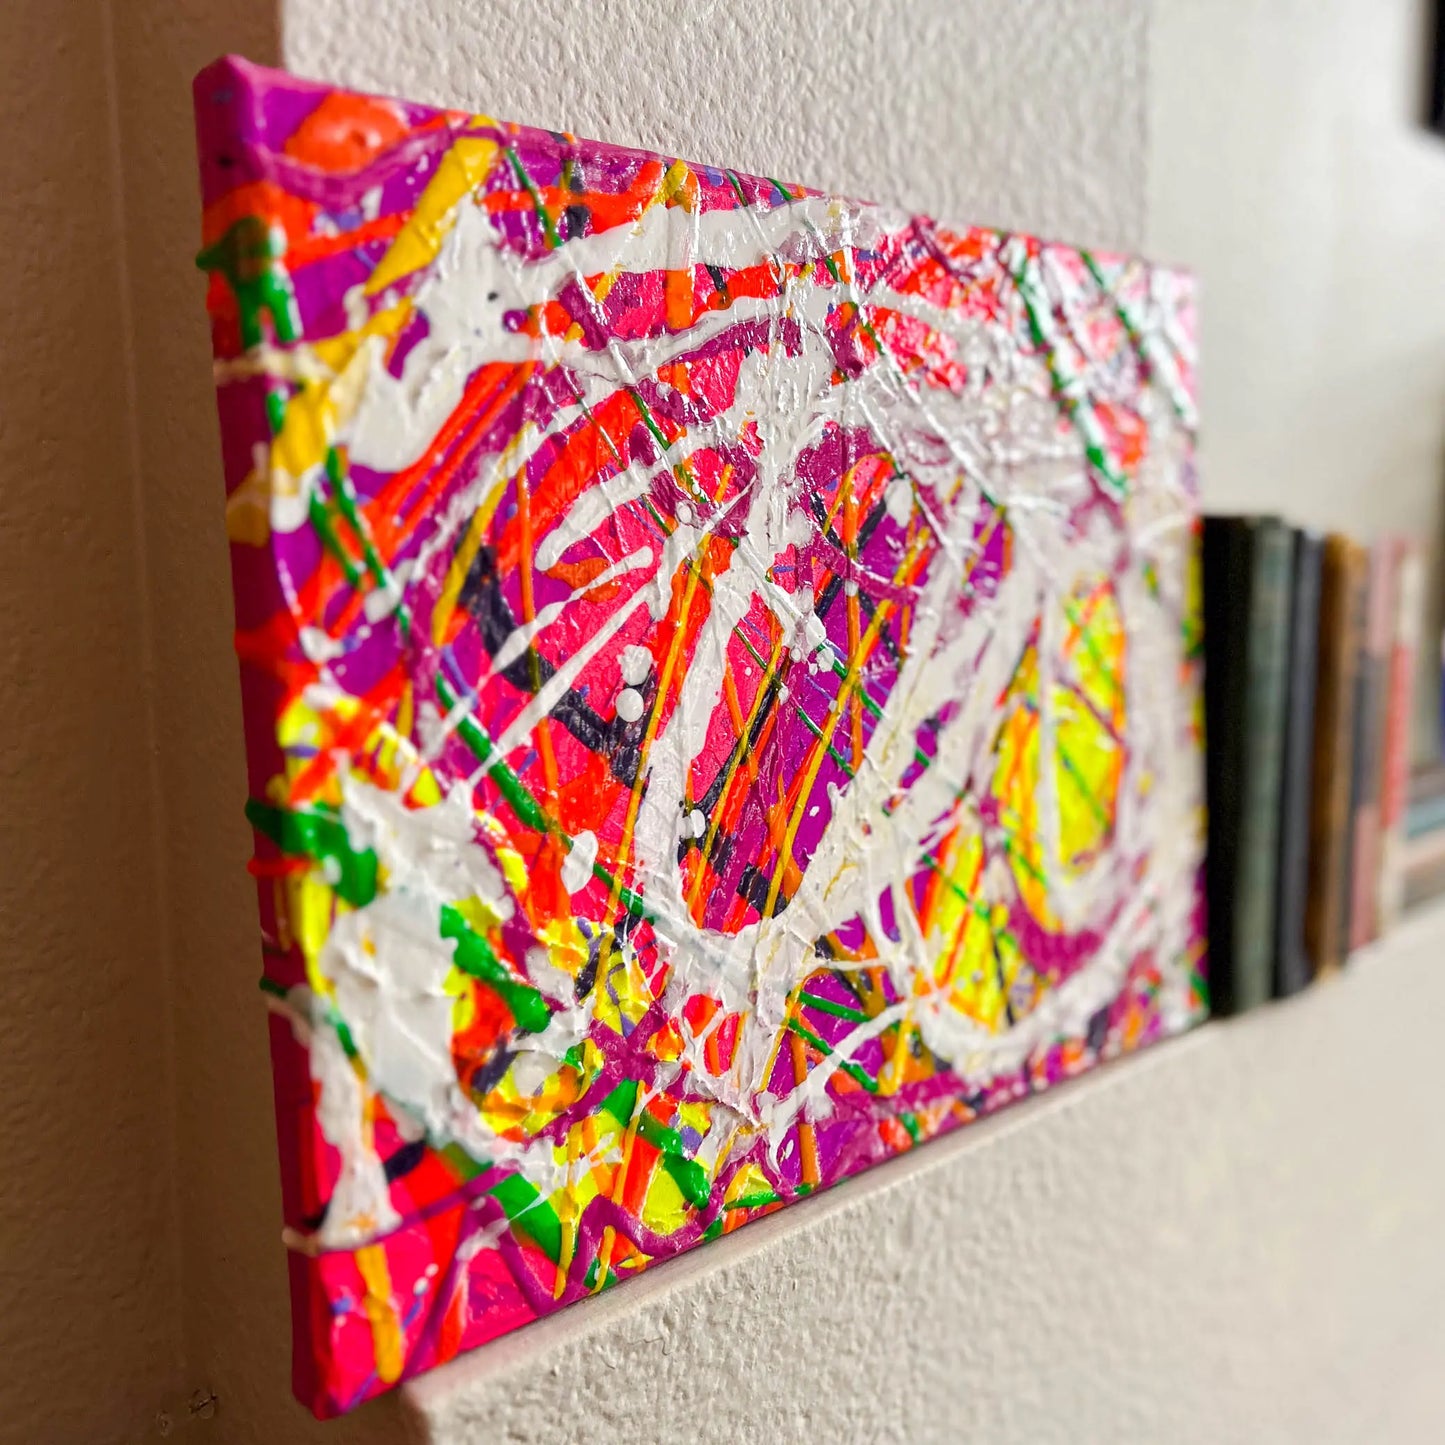 Neon Revolution 11x14 Abstract Painting